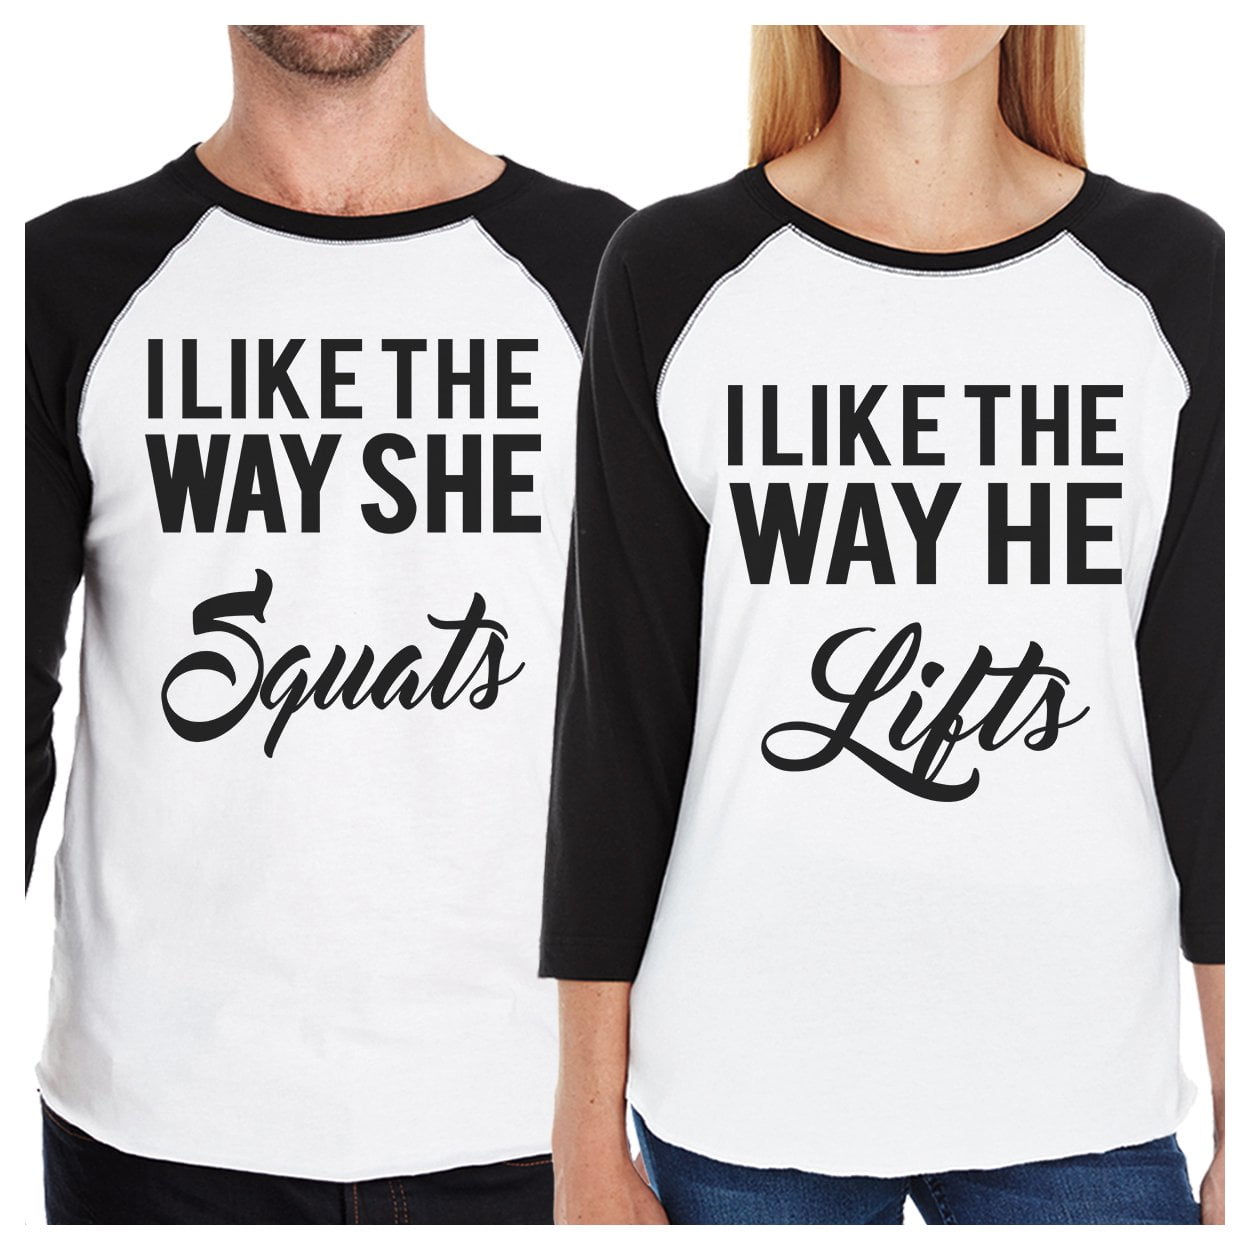 Workout shirt Funny Squats Shirt Squat shirt Squats Are My Therapy Hooded Sweatshirt Funny workout shirt Gym shirt Squat day shirt